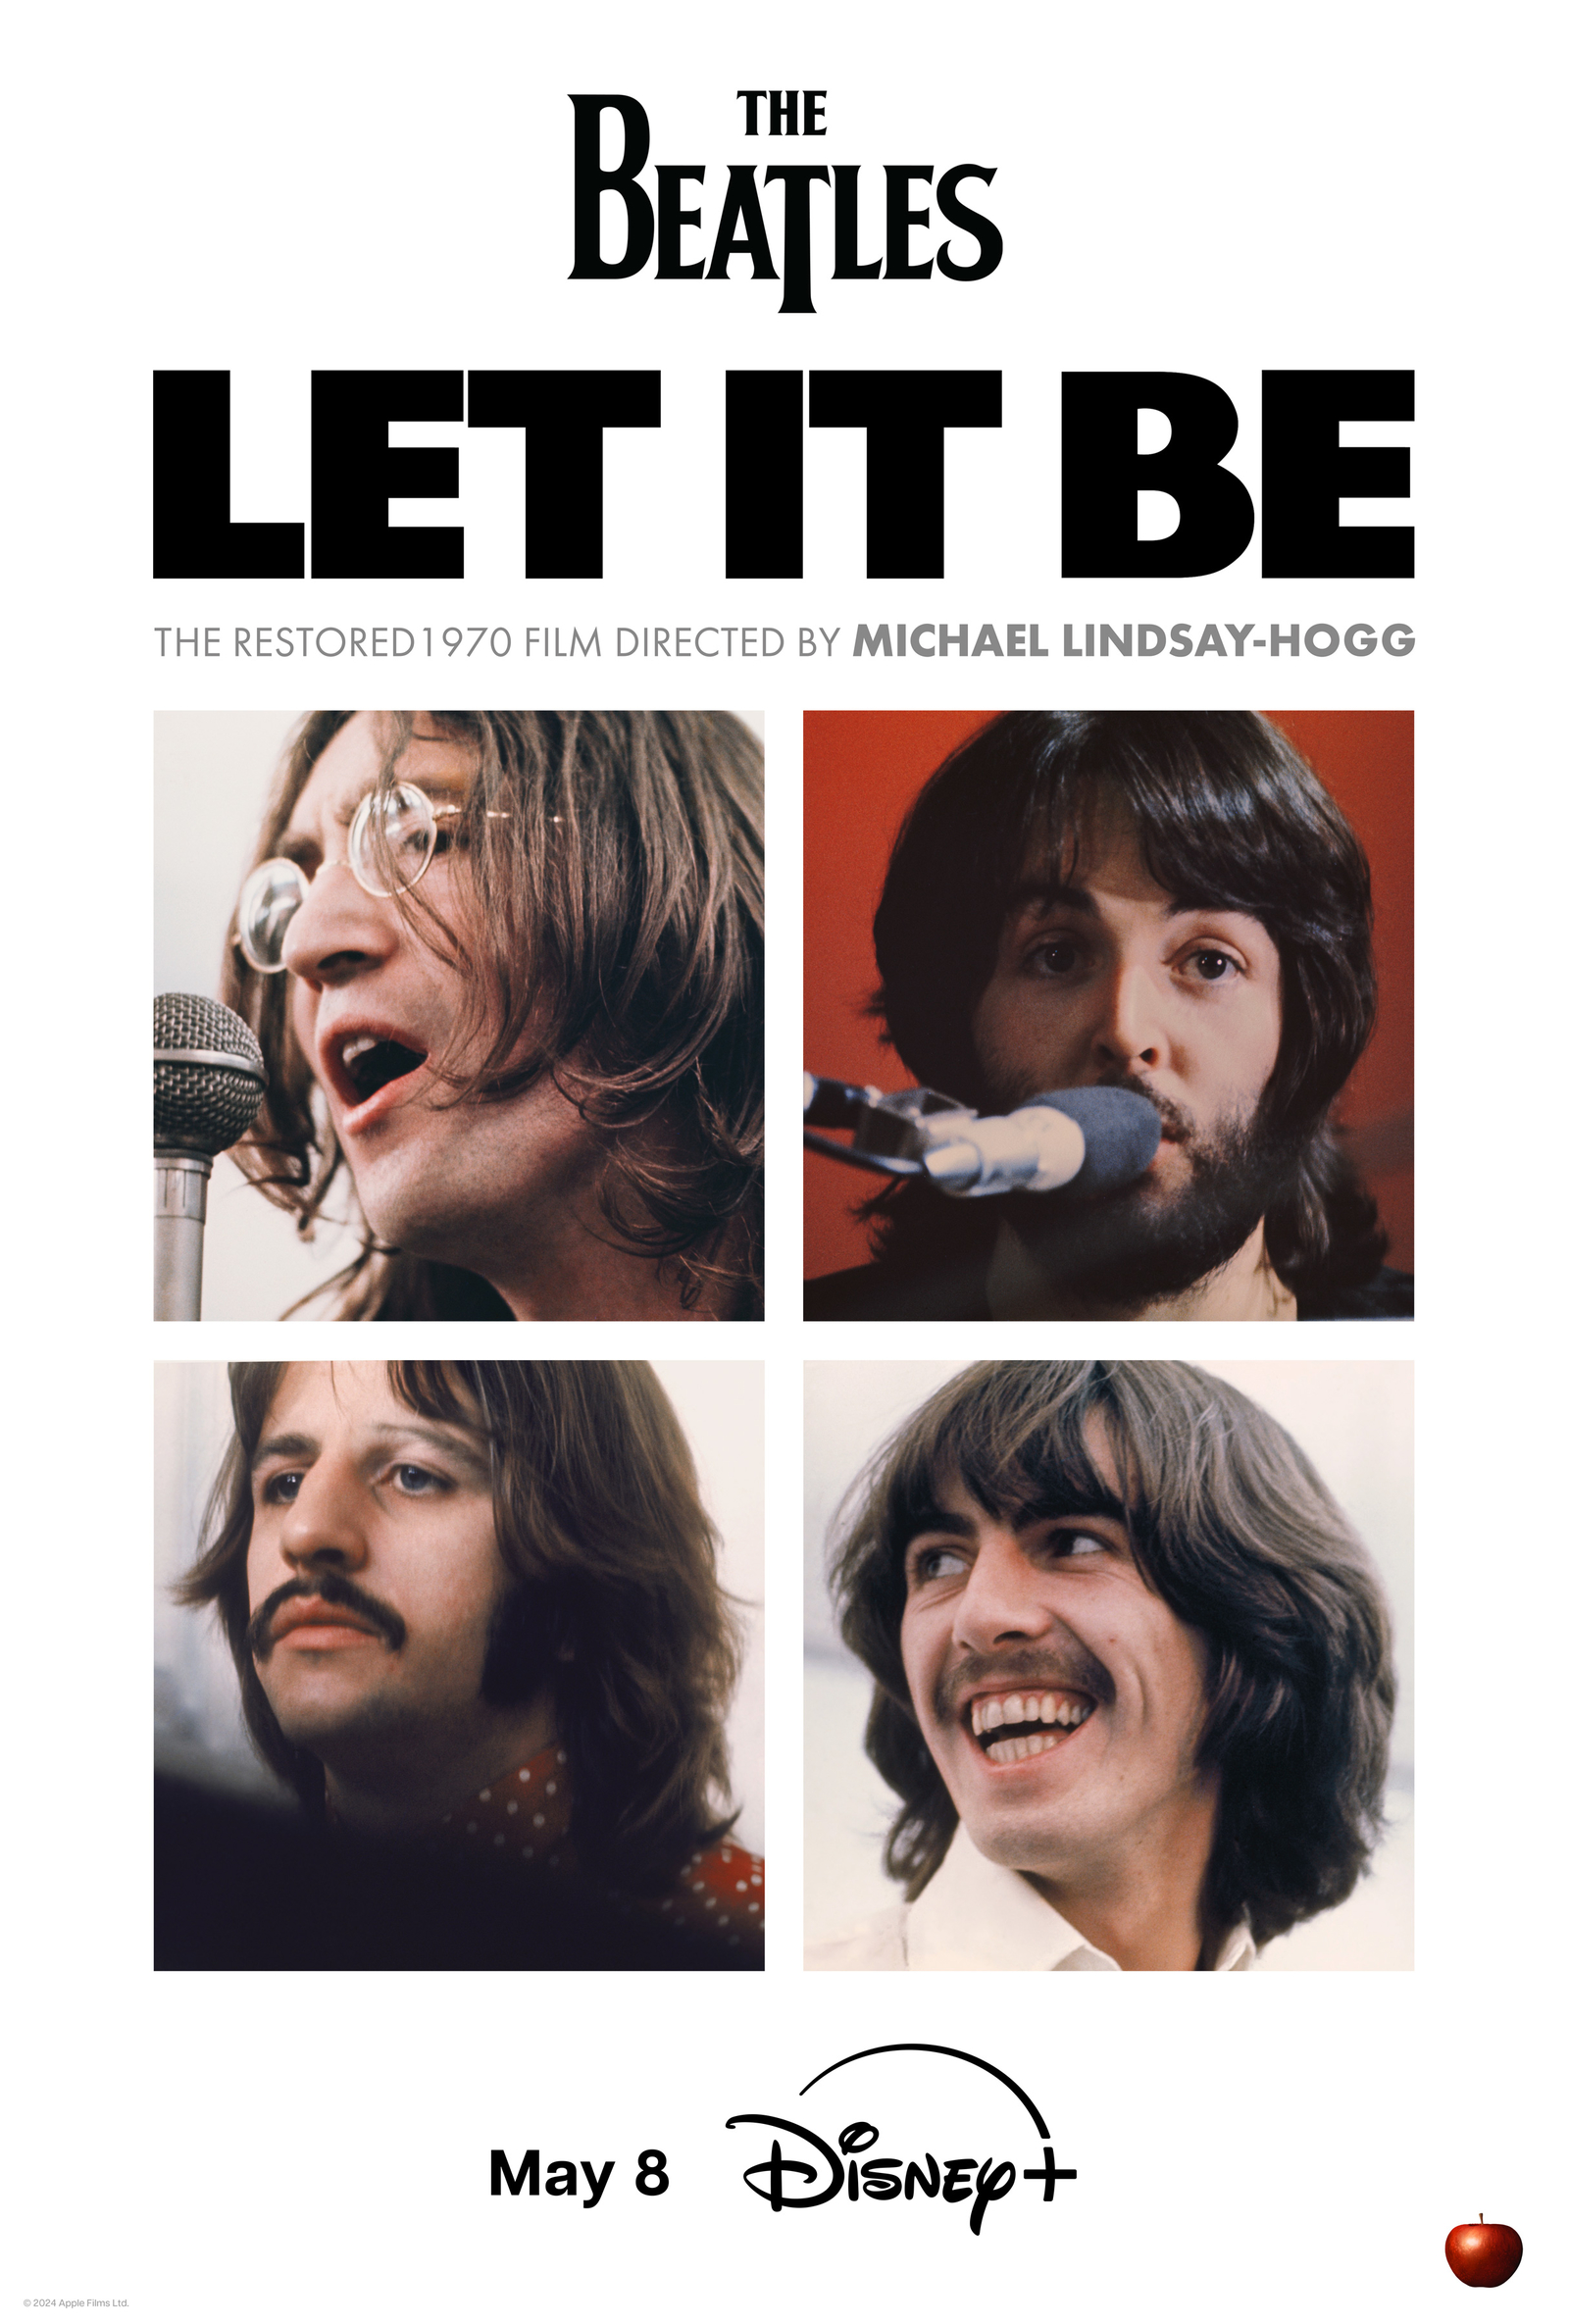 The Beatles documentary ‘Let it Be’ will be available for 1st time in more than 50 years exclusively on Disney+ [Video]